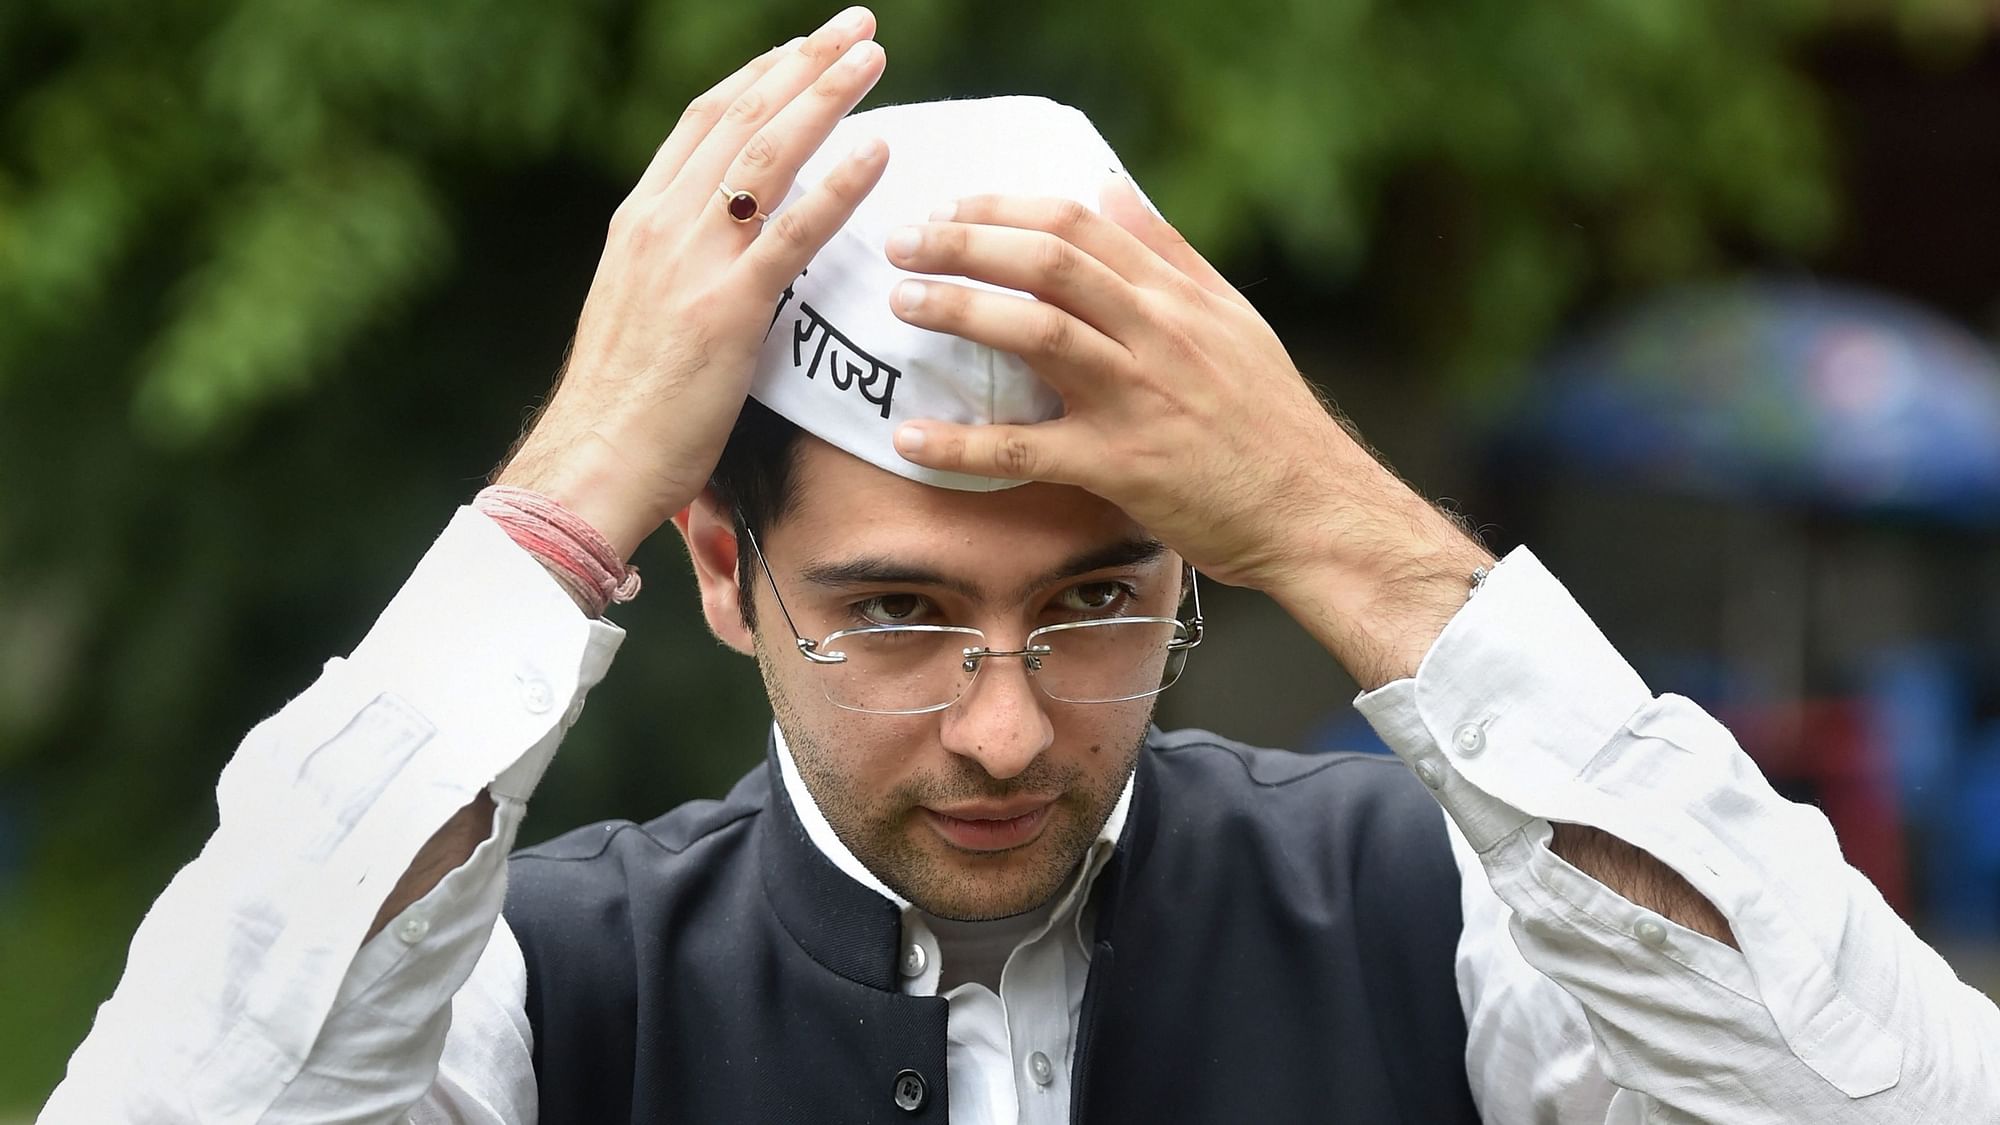 <div class="paragraphs"><p>Aam Aadmi Party MP <a href="https://www.thequint.com/news/politics/bhagwant-mann-raghav-chadha-aam-aadmi-party-punjab-arvind-kejriwal">Raghav Chadha</a> met Union Finance Minister<a href="https://www.thequint.com/news/india/notices-issued-to-oppo-vivo-india-xiomi-tax-evasion-finance-minister-nirmala-sitharaman-rajya-sabha"> Nirmala Sitharaman</a> on Thursday, 4 August, and sought a rollback of the 12 percent <a href="https://www.thequint.com/news/politics/nirmala-sitharaman-good-and-services-tax-crematoriums-remark-twitter-reactions">Goods and Services Tax</a> on inns near the <a href="https://www.thequint.com/news/india/portrait-of-former-cm-beant-singhs-assassin-installed-in-golden-temple-museum">Golden Temple</a> in Punjab's Amritsar, saying it is a reminder of the Mughal era 'jizya' tax.</p></div>